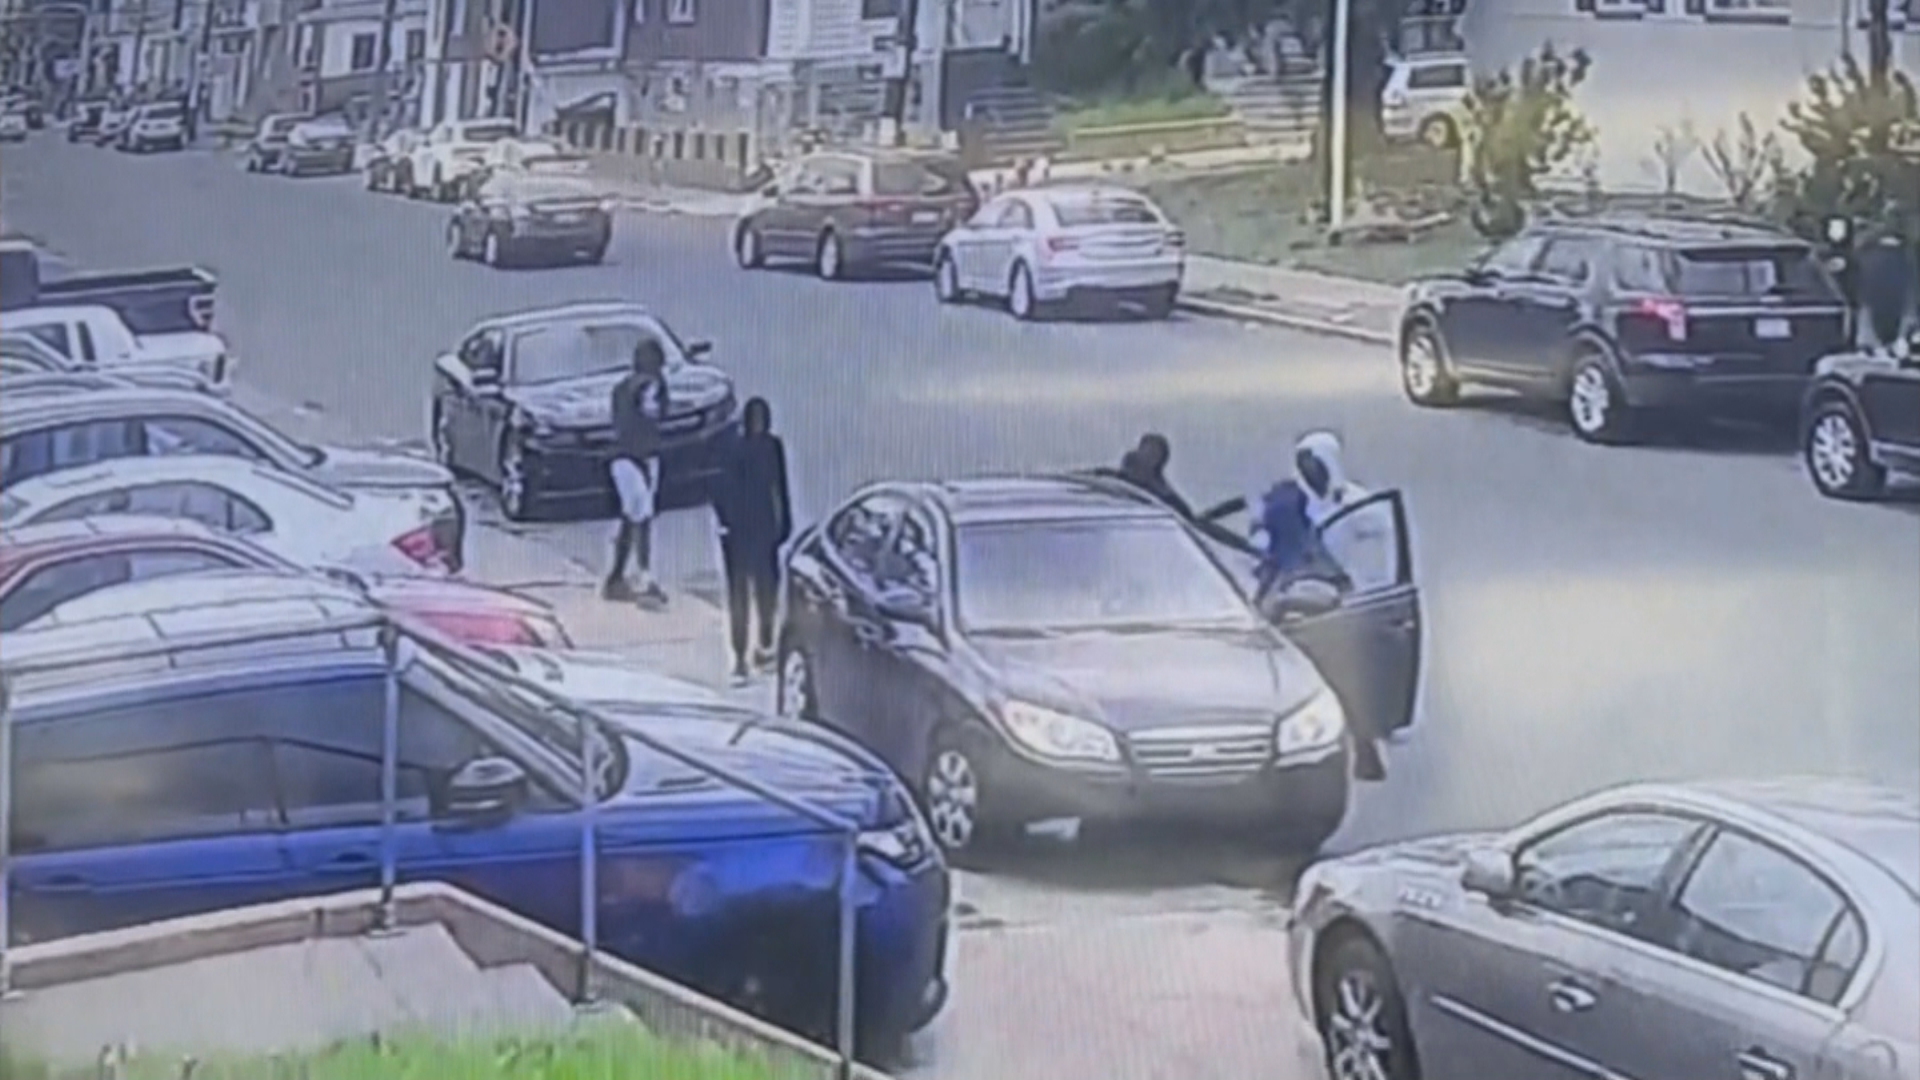 62-Year-Old Man Violently Carjacked By Group Of Teenagers In Olney – CBS Philly